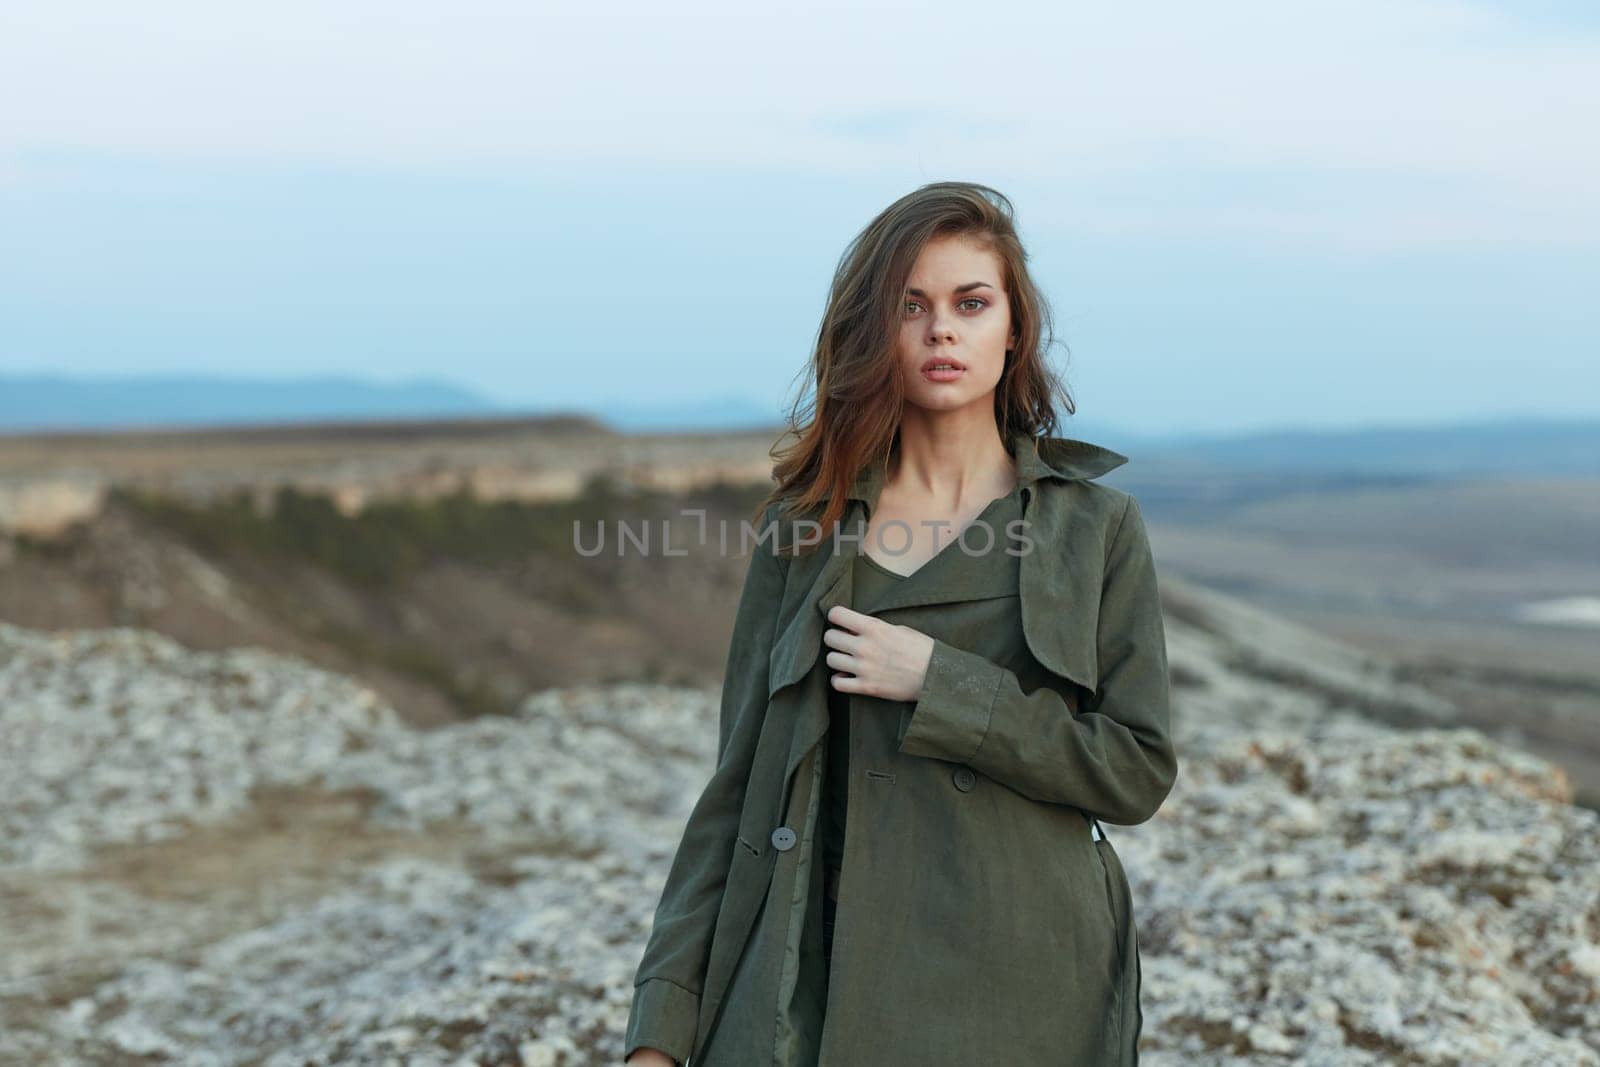 Woman in olive trench coat stands on hill overlooking vast ocean expanse